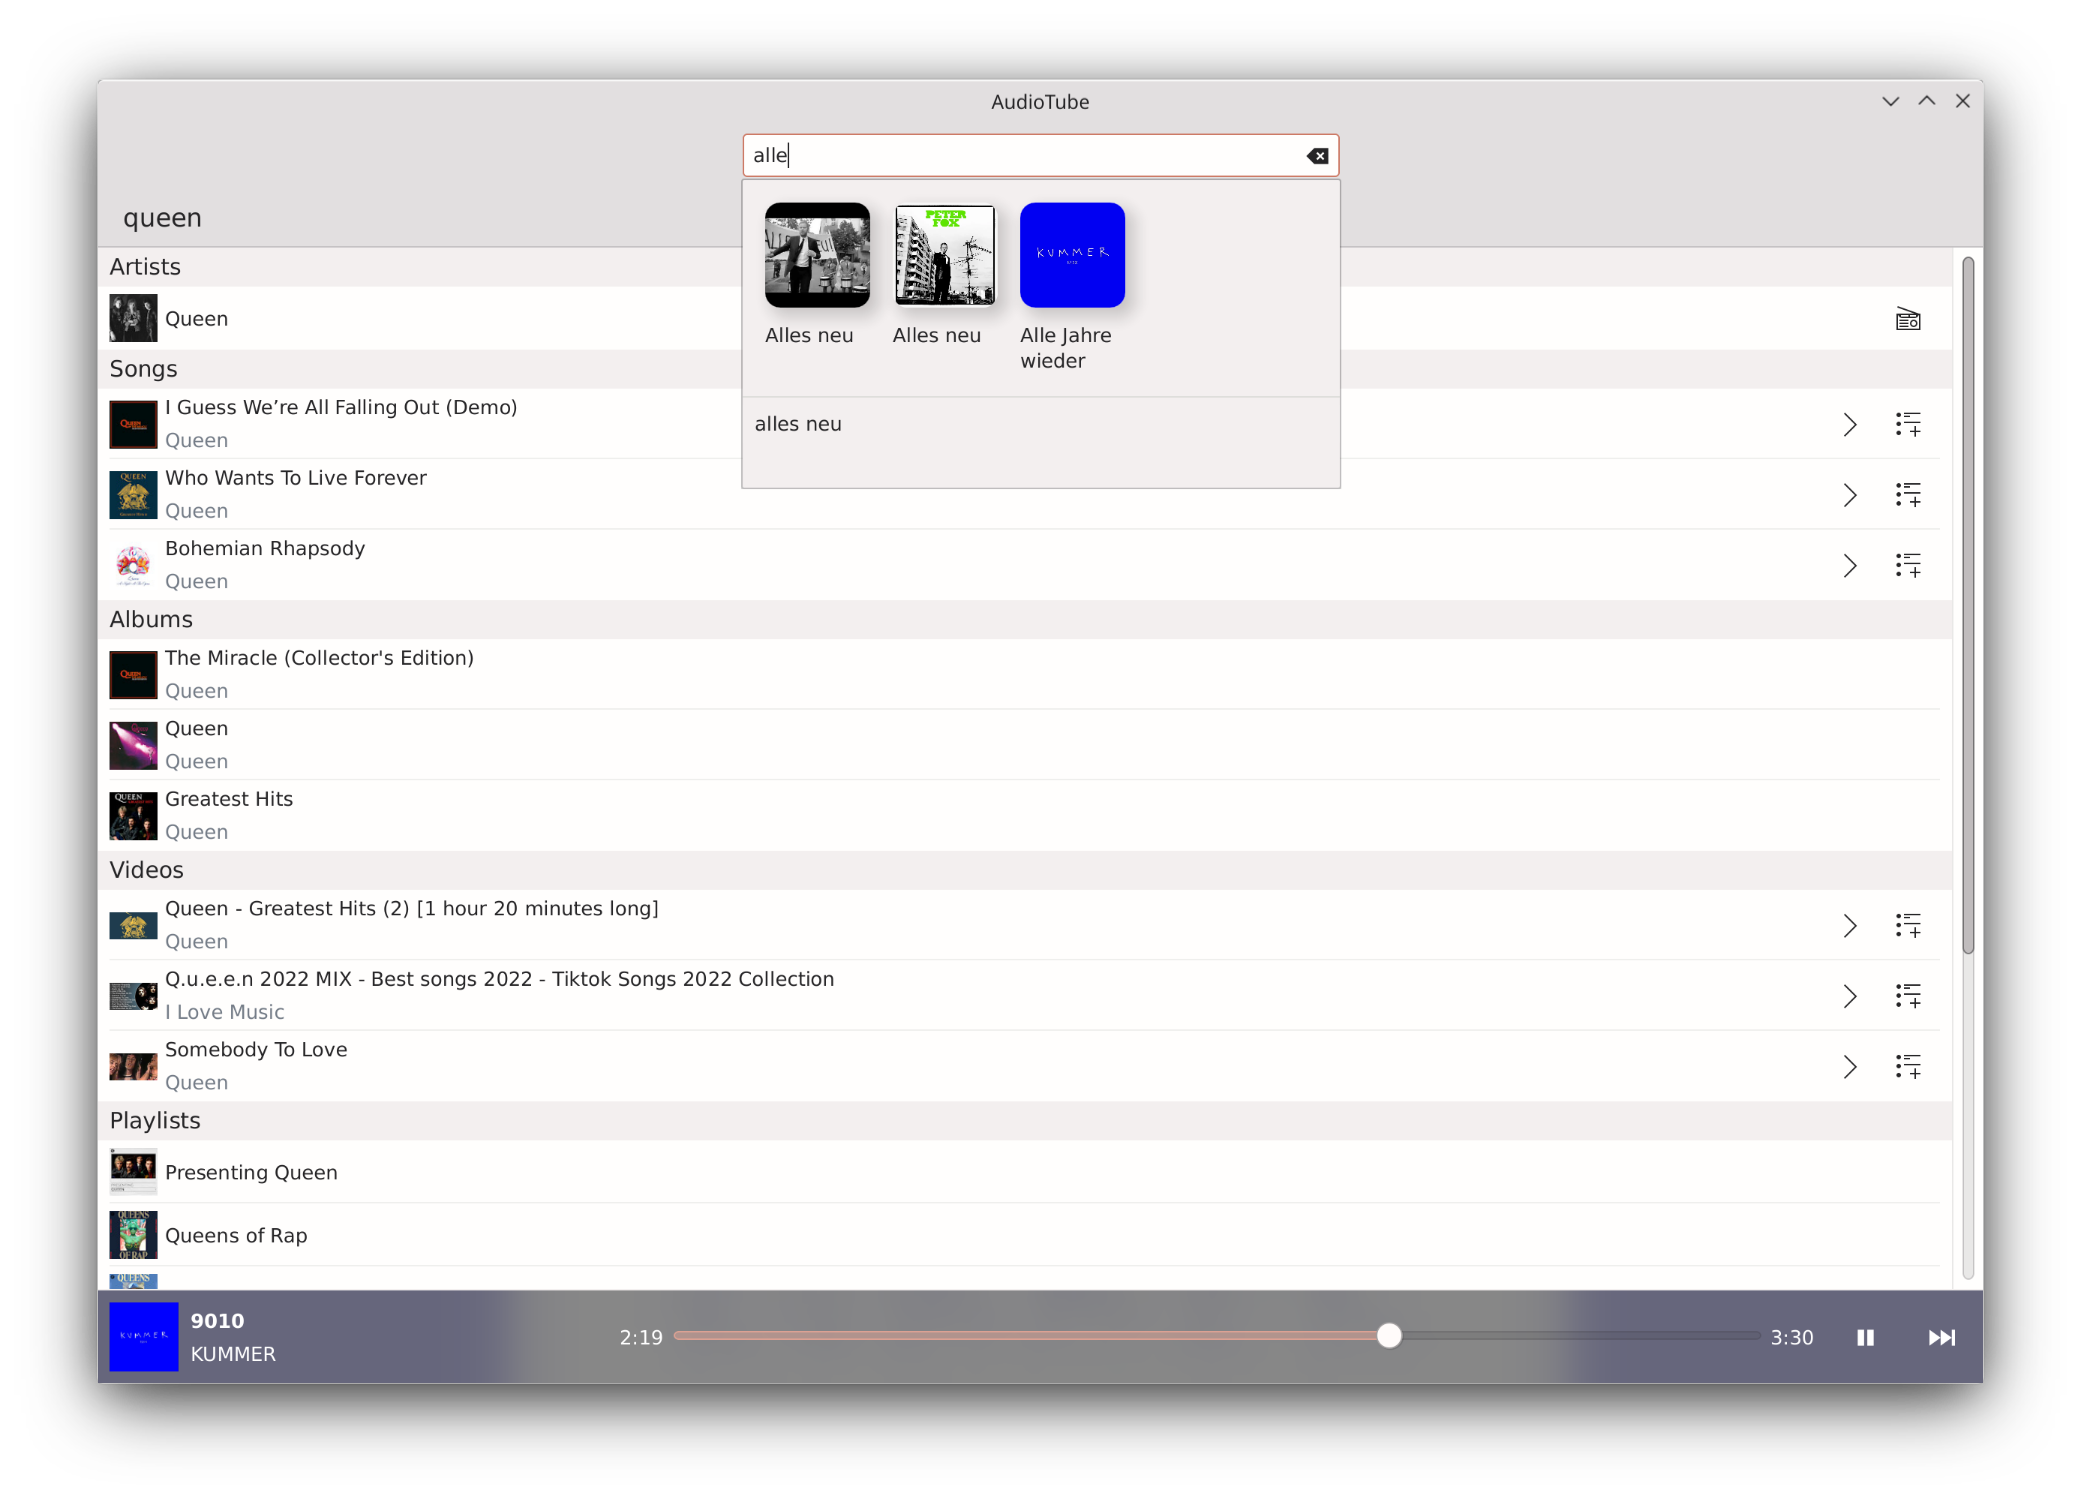 search dialogue which displays songs from your history